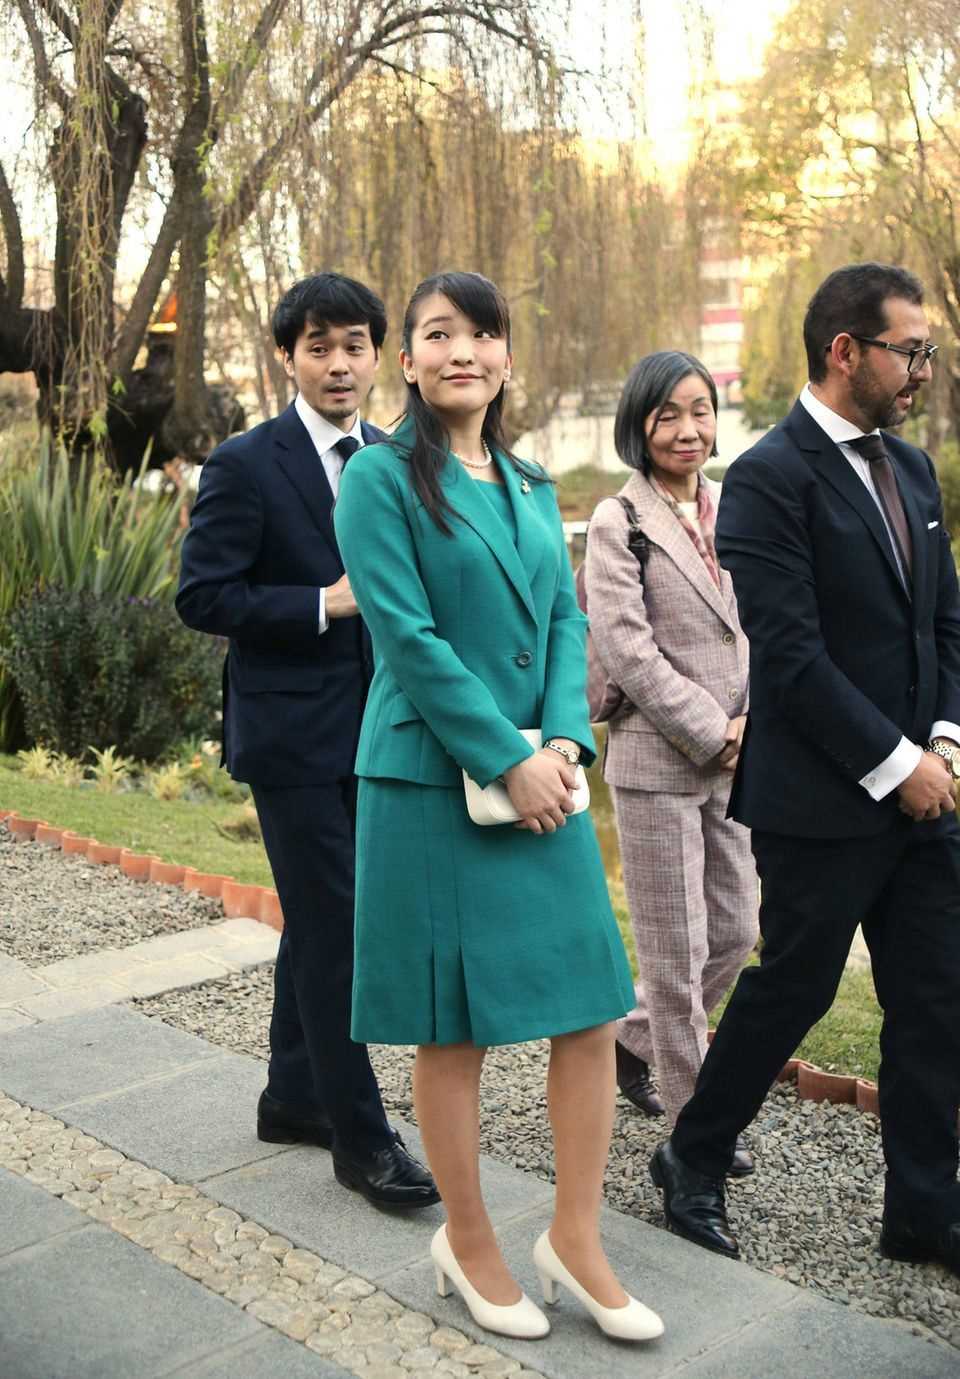 Princess Mako visiting the Japanese Garden in La Paz during her trip to Bolivia in mid-July 2019.